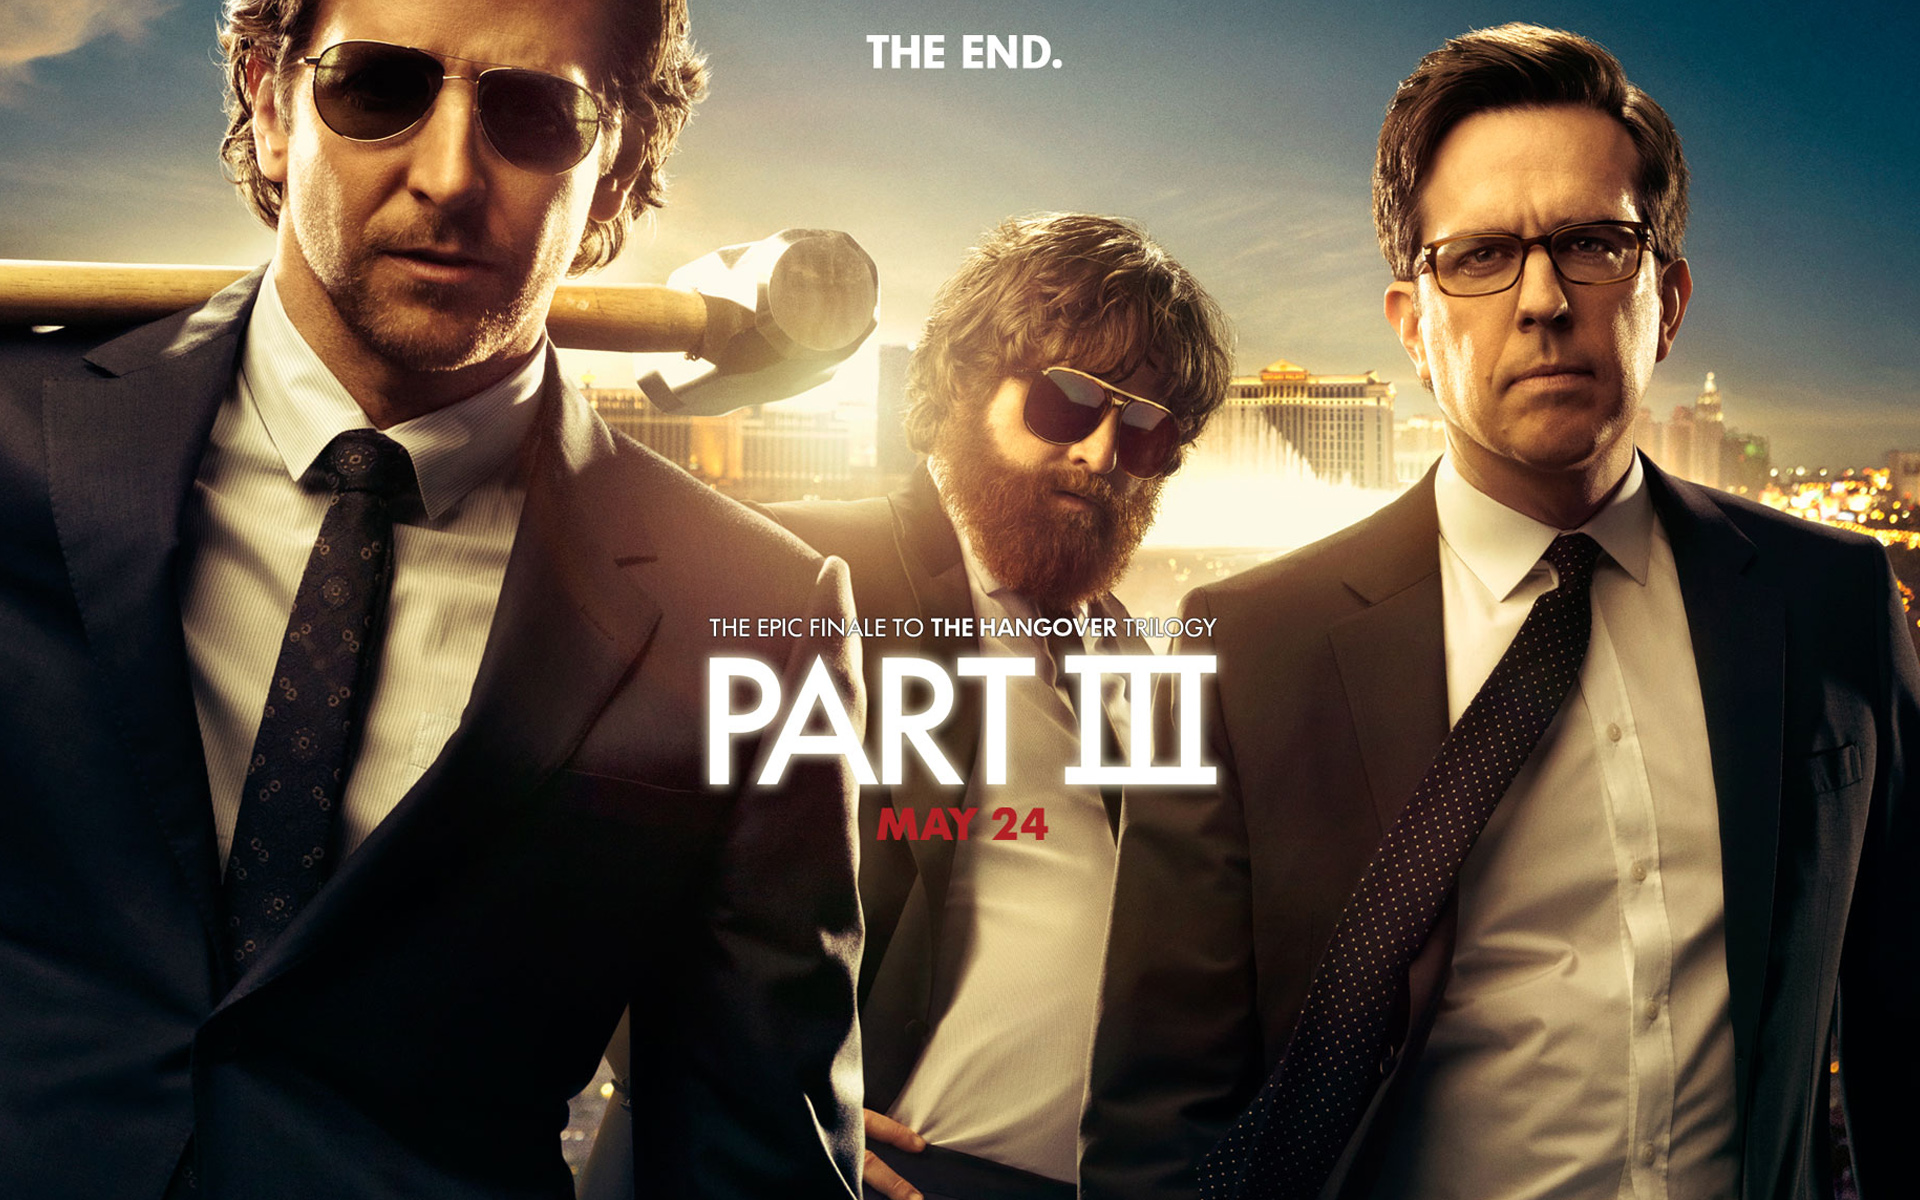 Hollywood Movie The Hangover 3 Plot Summary Reviews Actors Quotes 2013